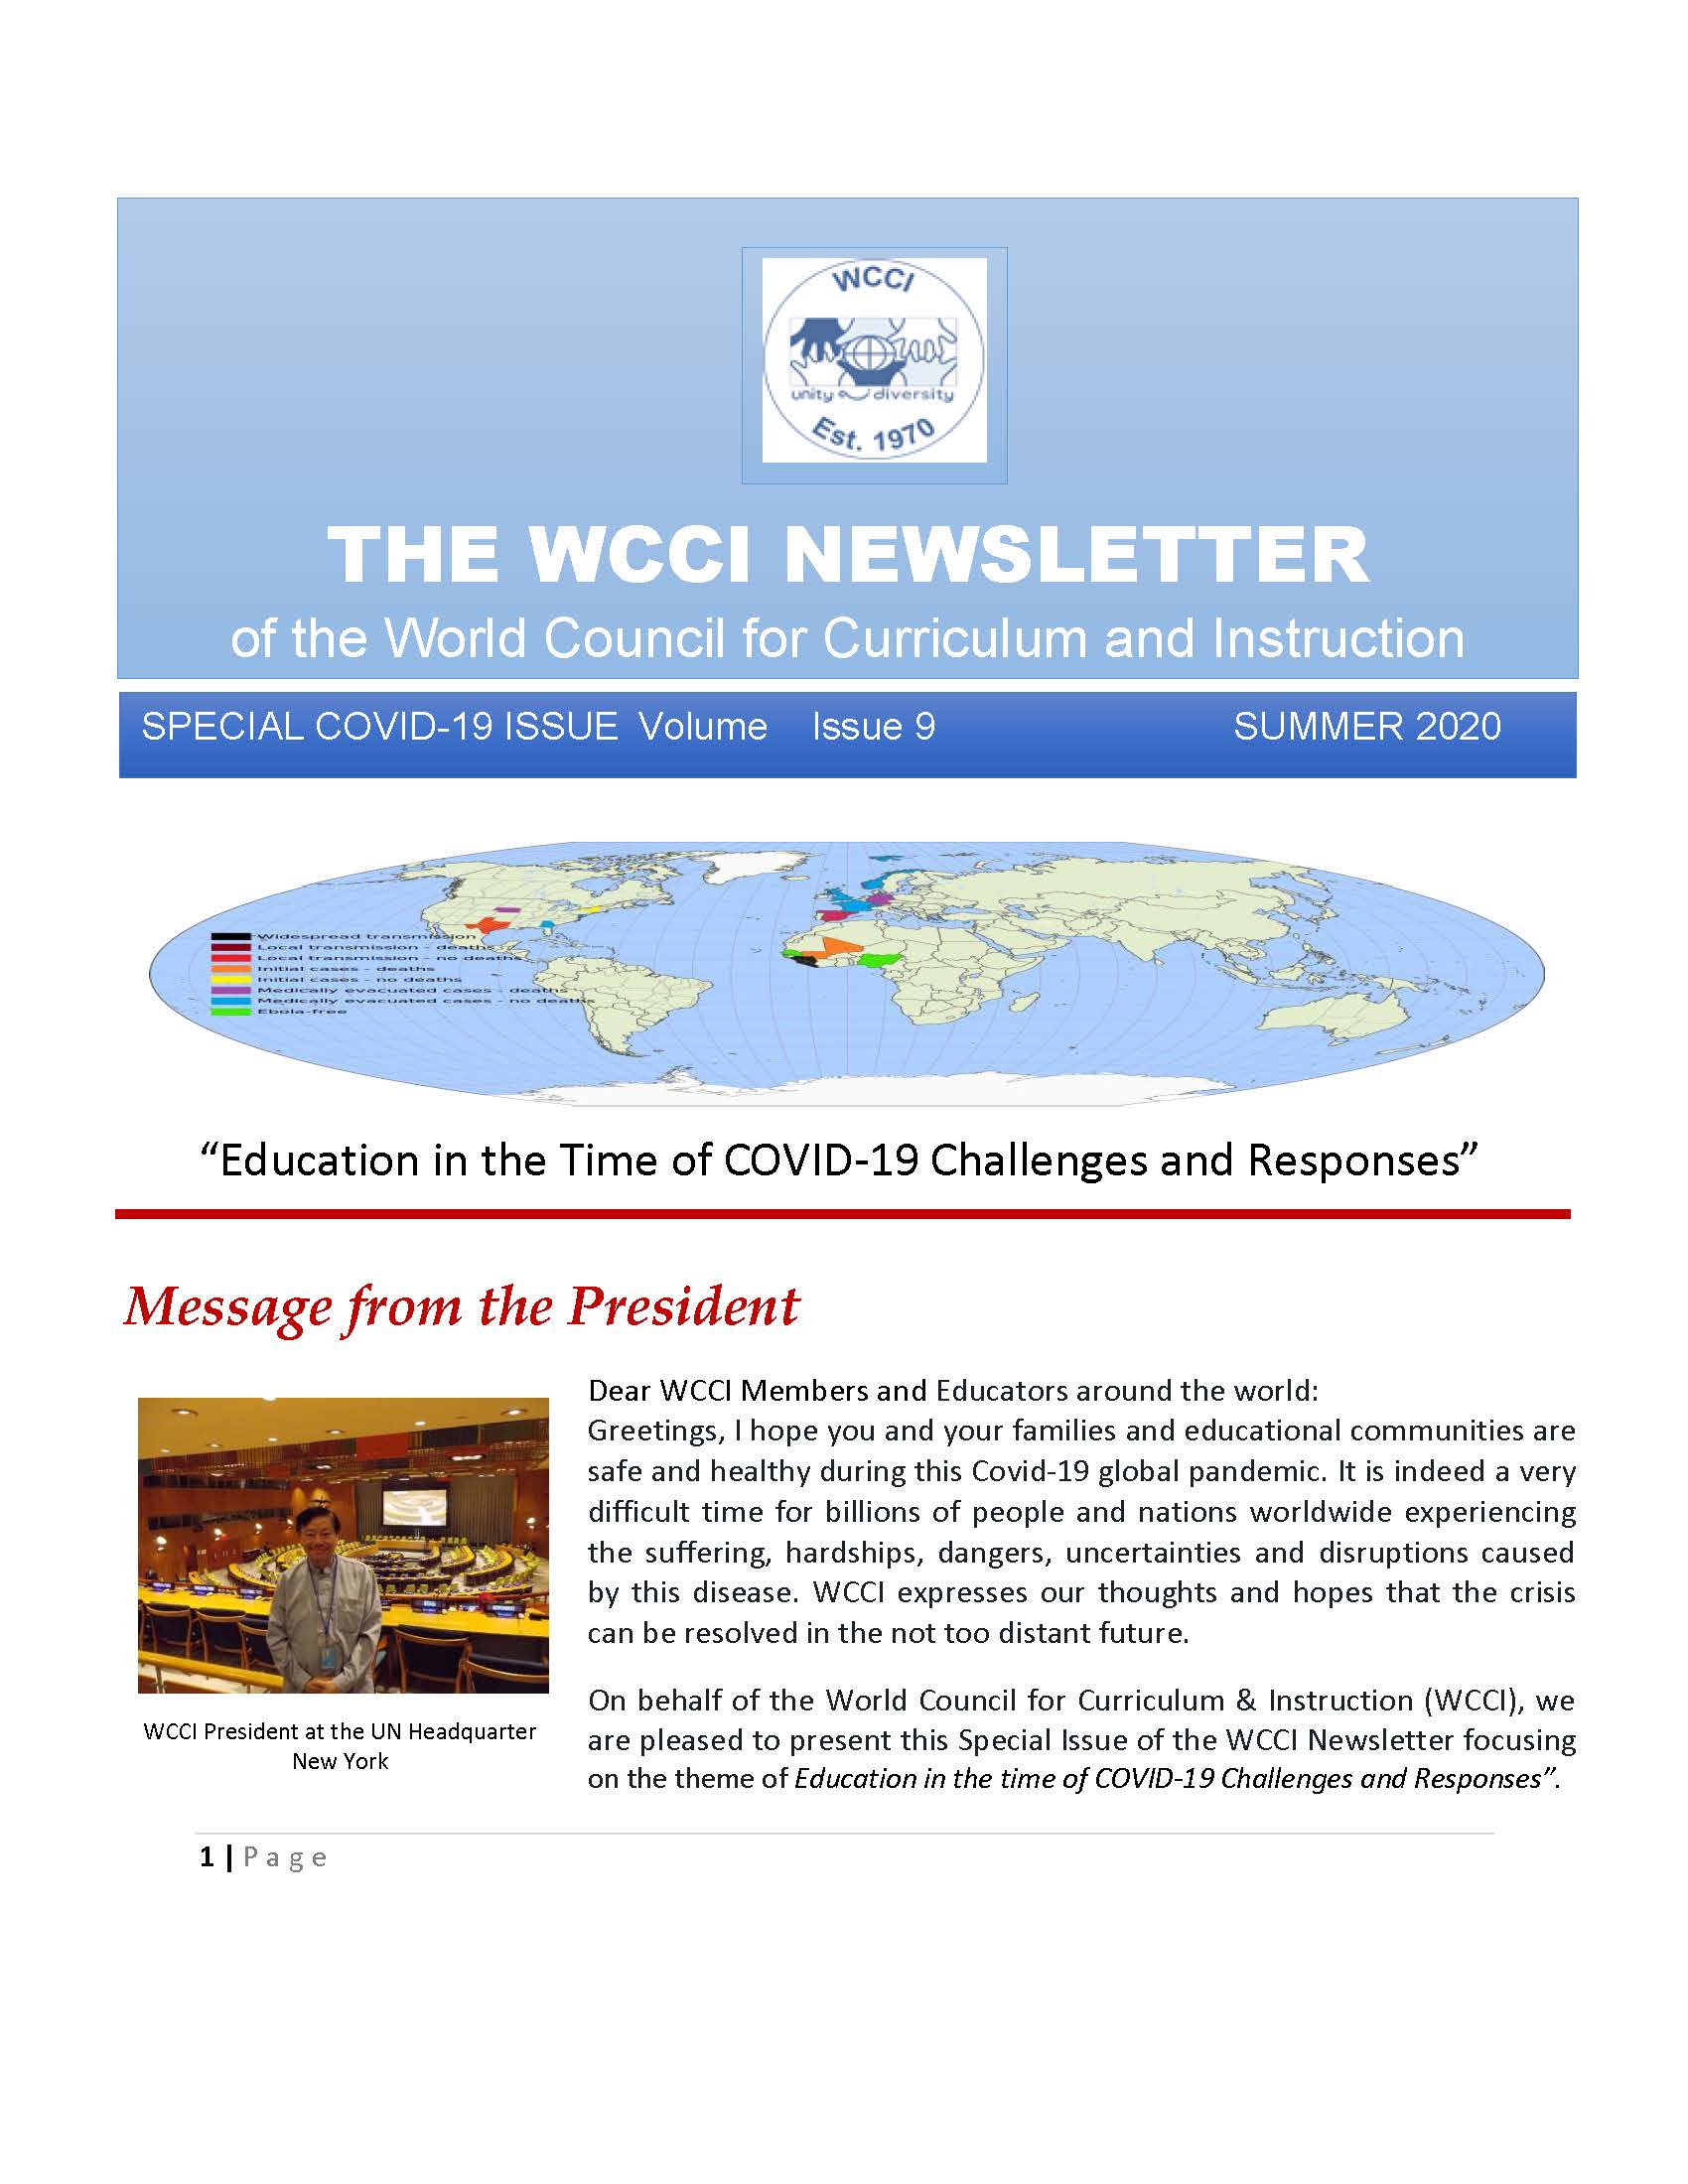 http://wcciphilippines.org.ph/images/magazines/wcci-summer-2020-newsletter_Page_01.jpg